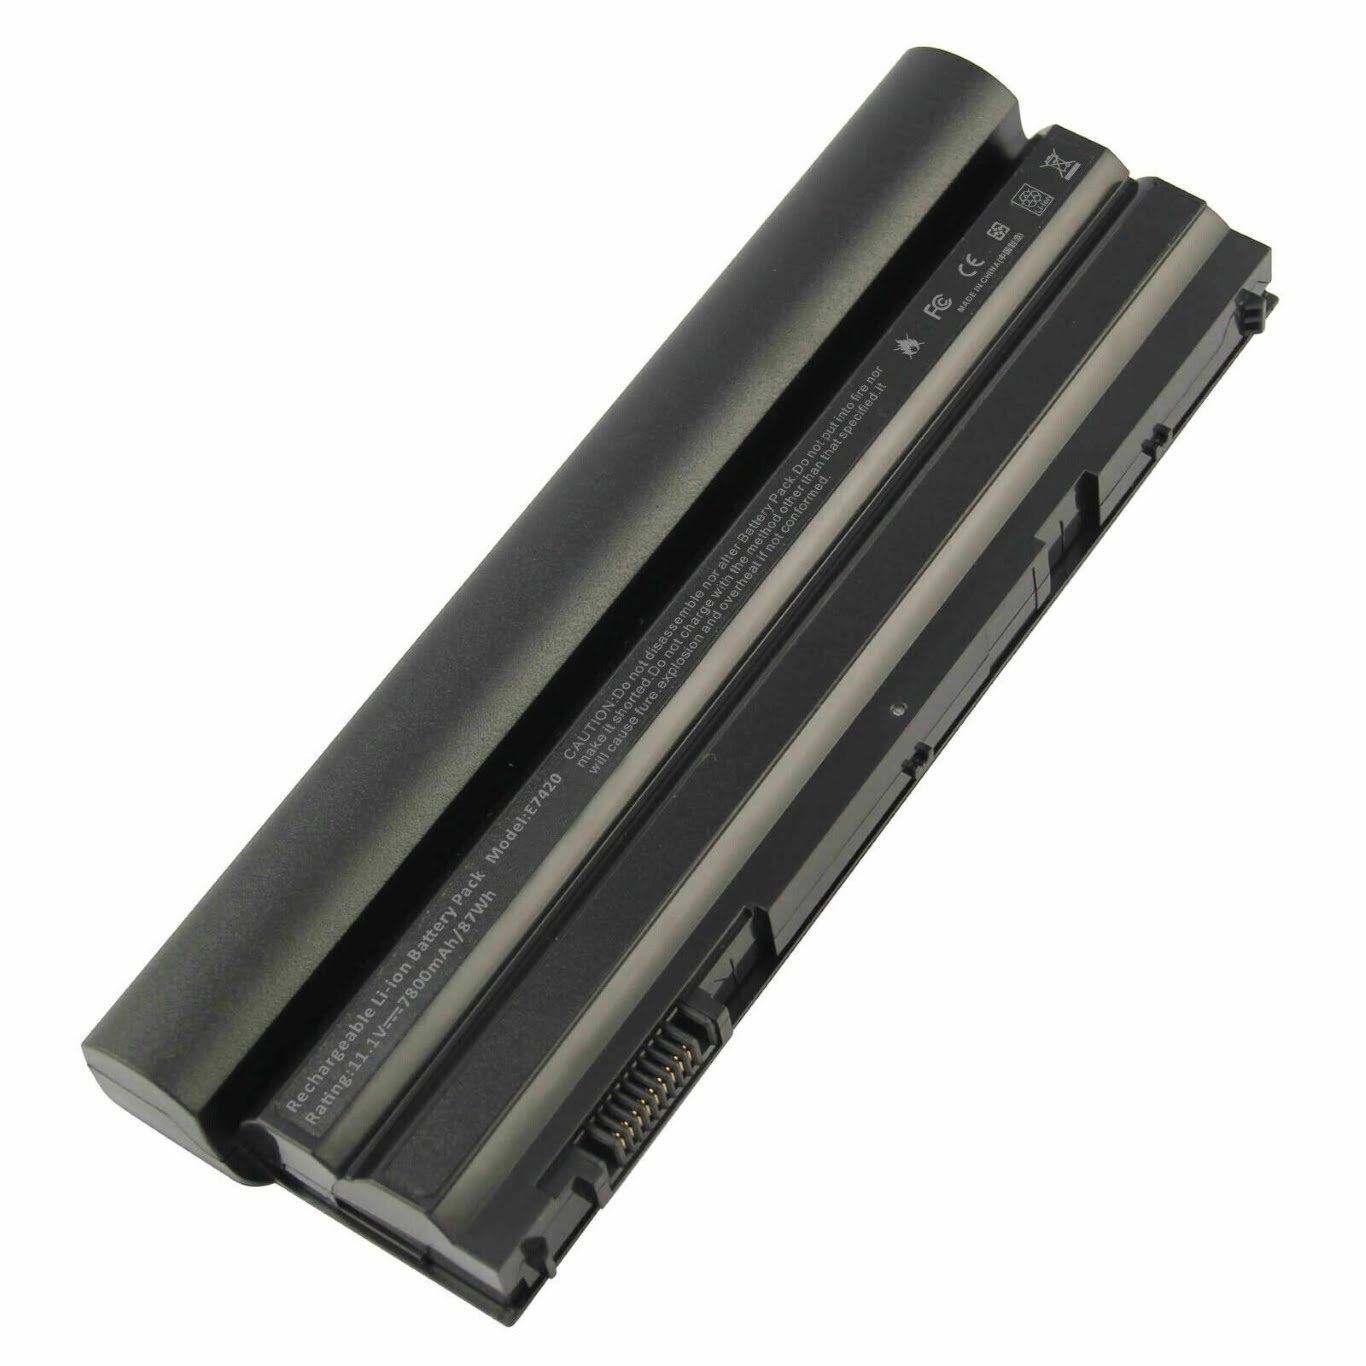 04NW9, 05G67C replacement Laptop Battery for Dell Inspiron 14R (5420), Inspiron 14R 4420, 6 cells, 11.1 V, 5200 Mah